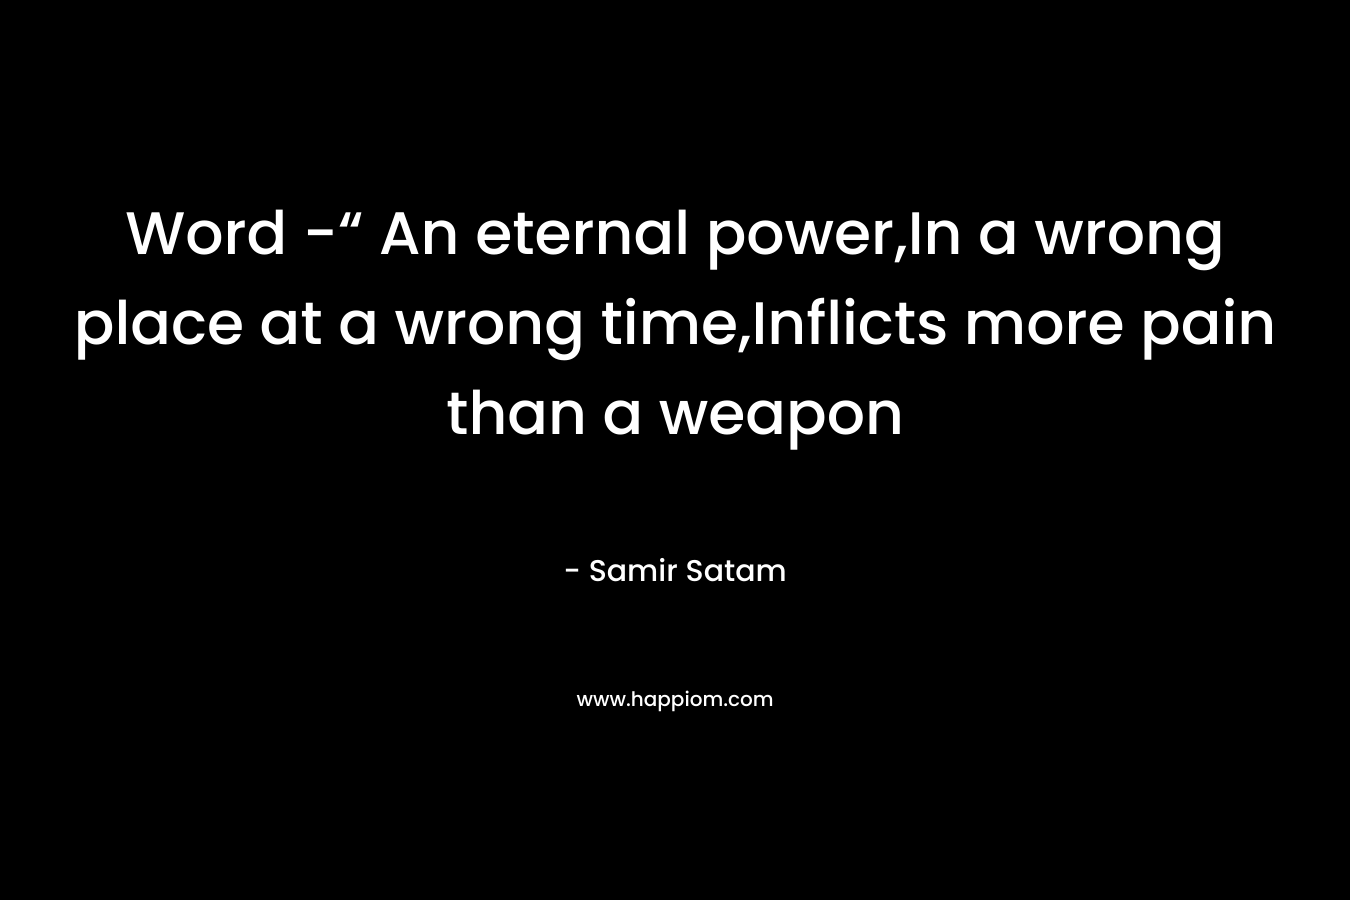 Word -“ An eternal power,In a wrong place at a wrong time,Inflicts more pain than a weapon – Samir Satam